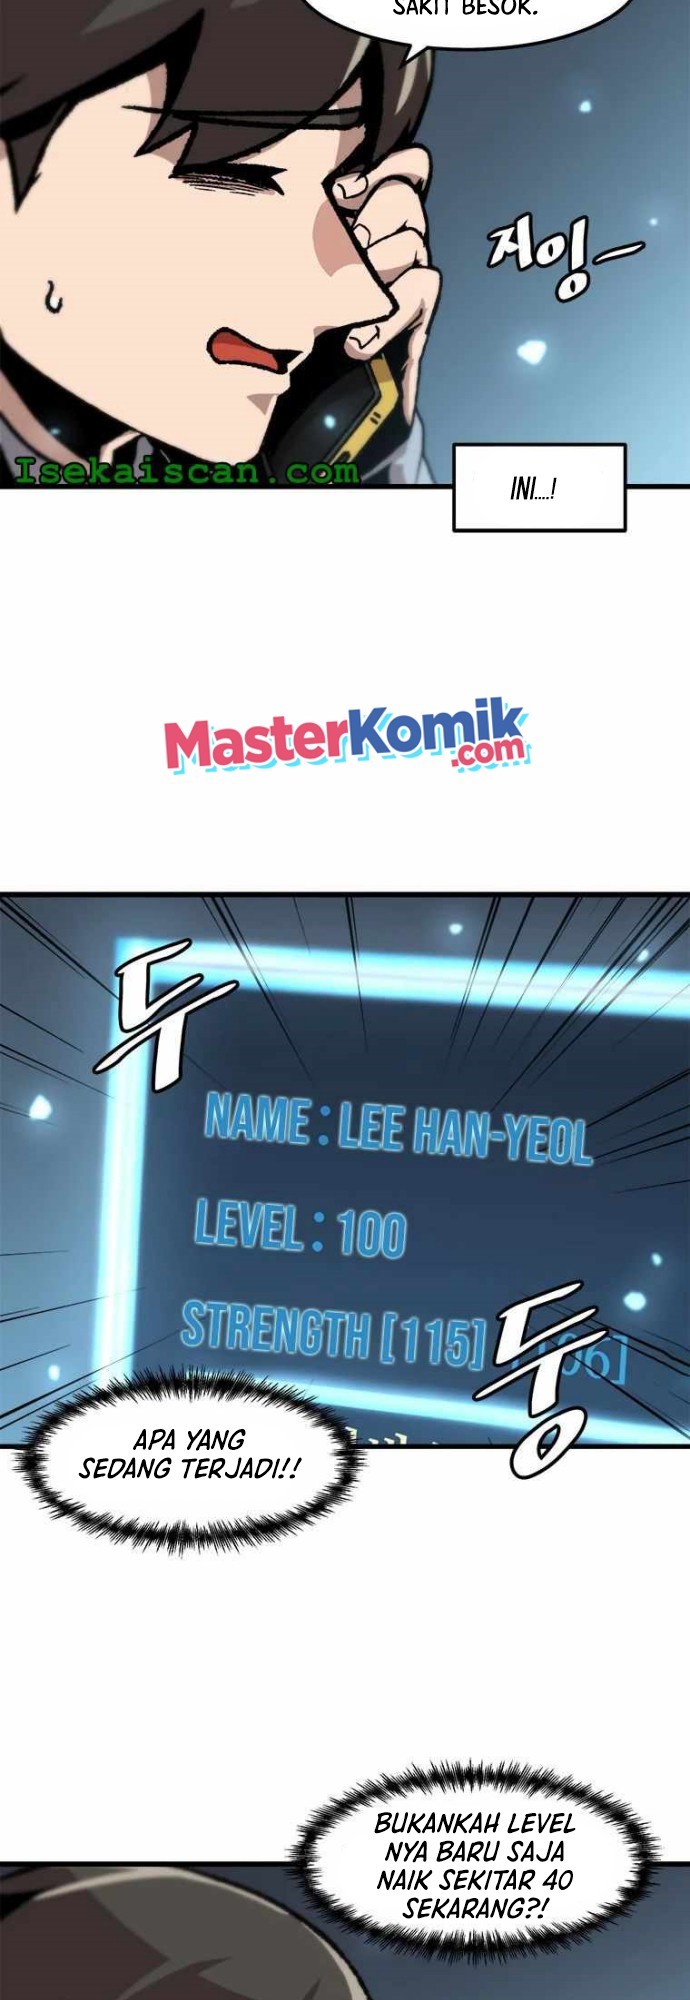 Bring My Level Up Alone Chapter 74